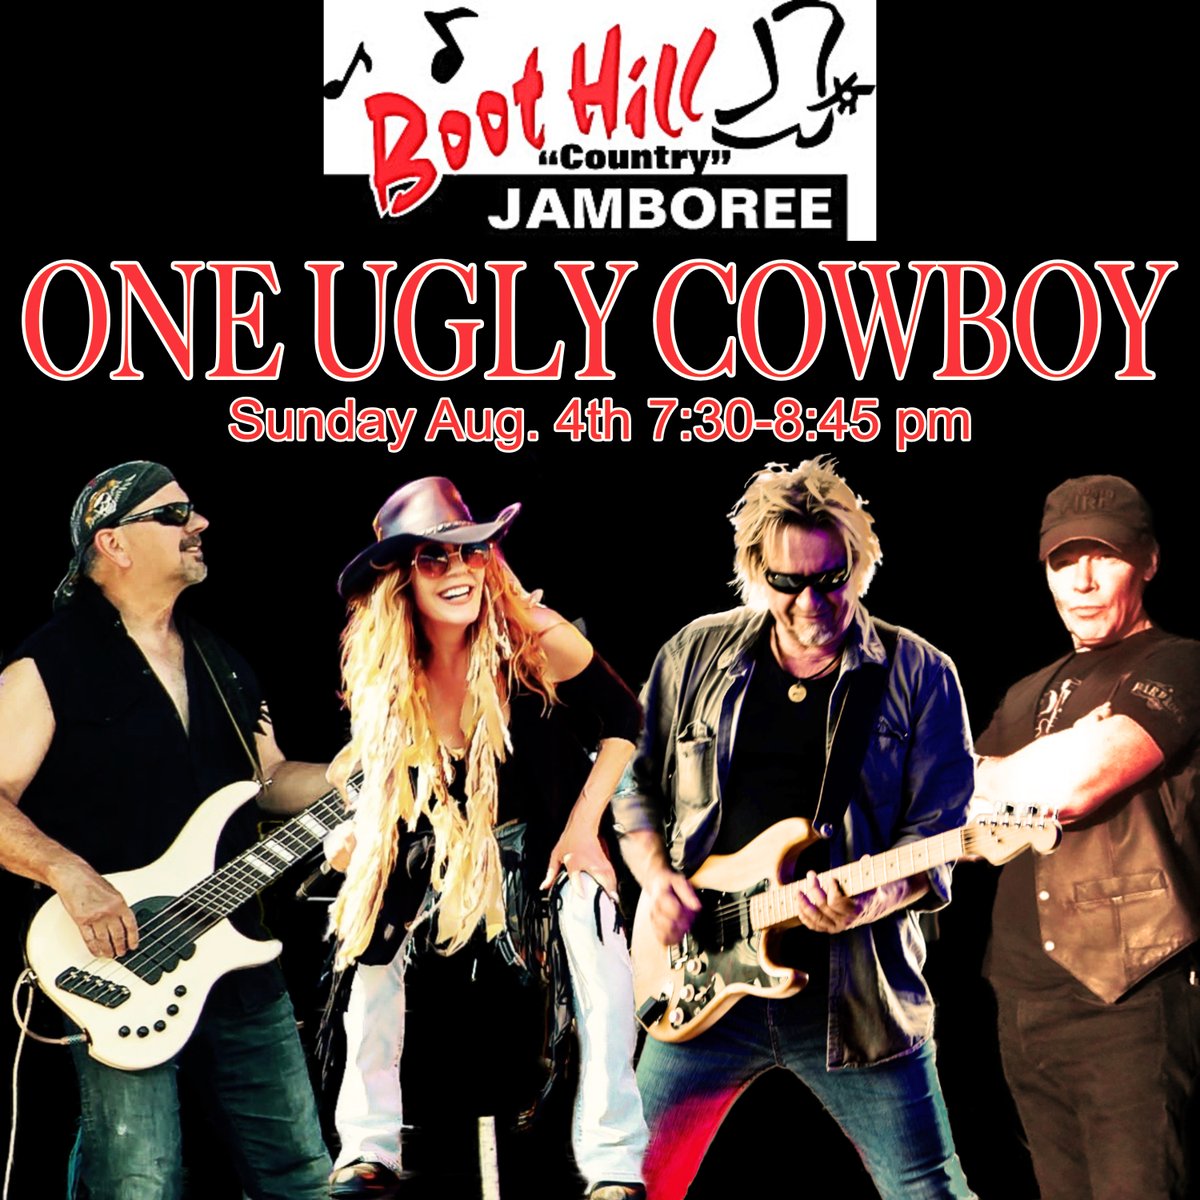 We're BACK at the 16th Annual Boot Hill 'Country' Jamboree. We played Boot Hill a bunch of years ago & met THE most amazing friends who have forever been part of our OUC journey. XO Gonna ROCK a RING OF FIRE 🔥 youtube.com/watch?v=wyD-NN… #summer #shows #boothillcountryjamboree